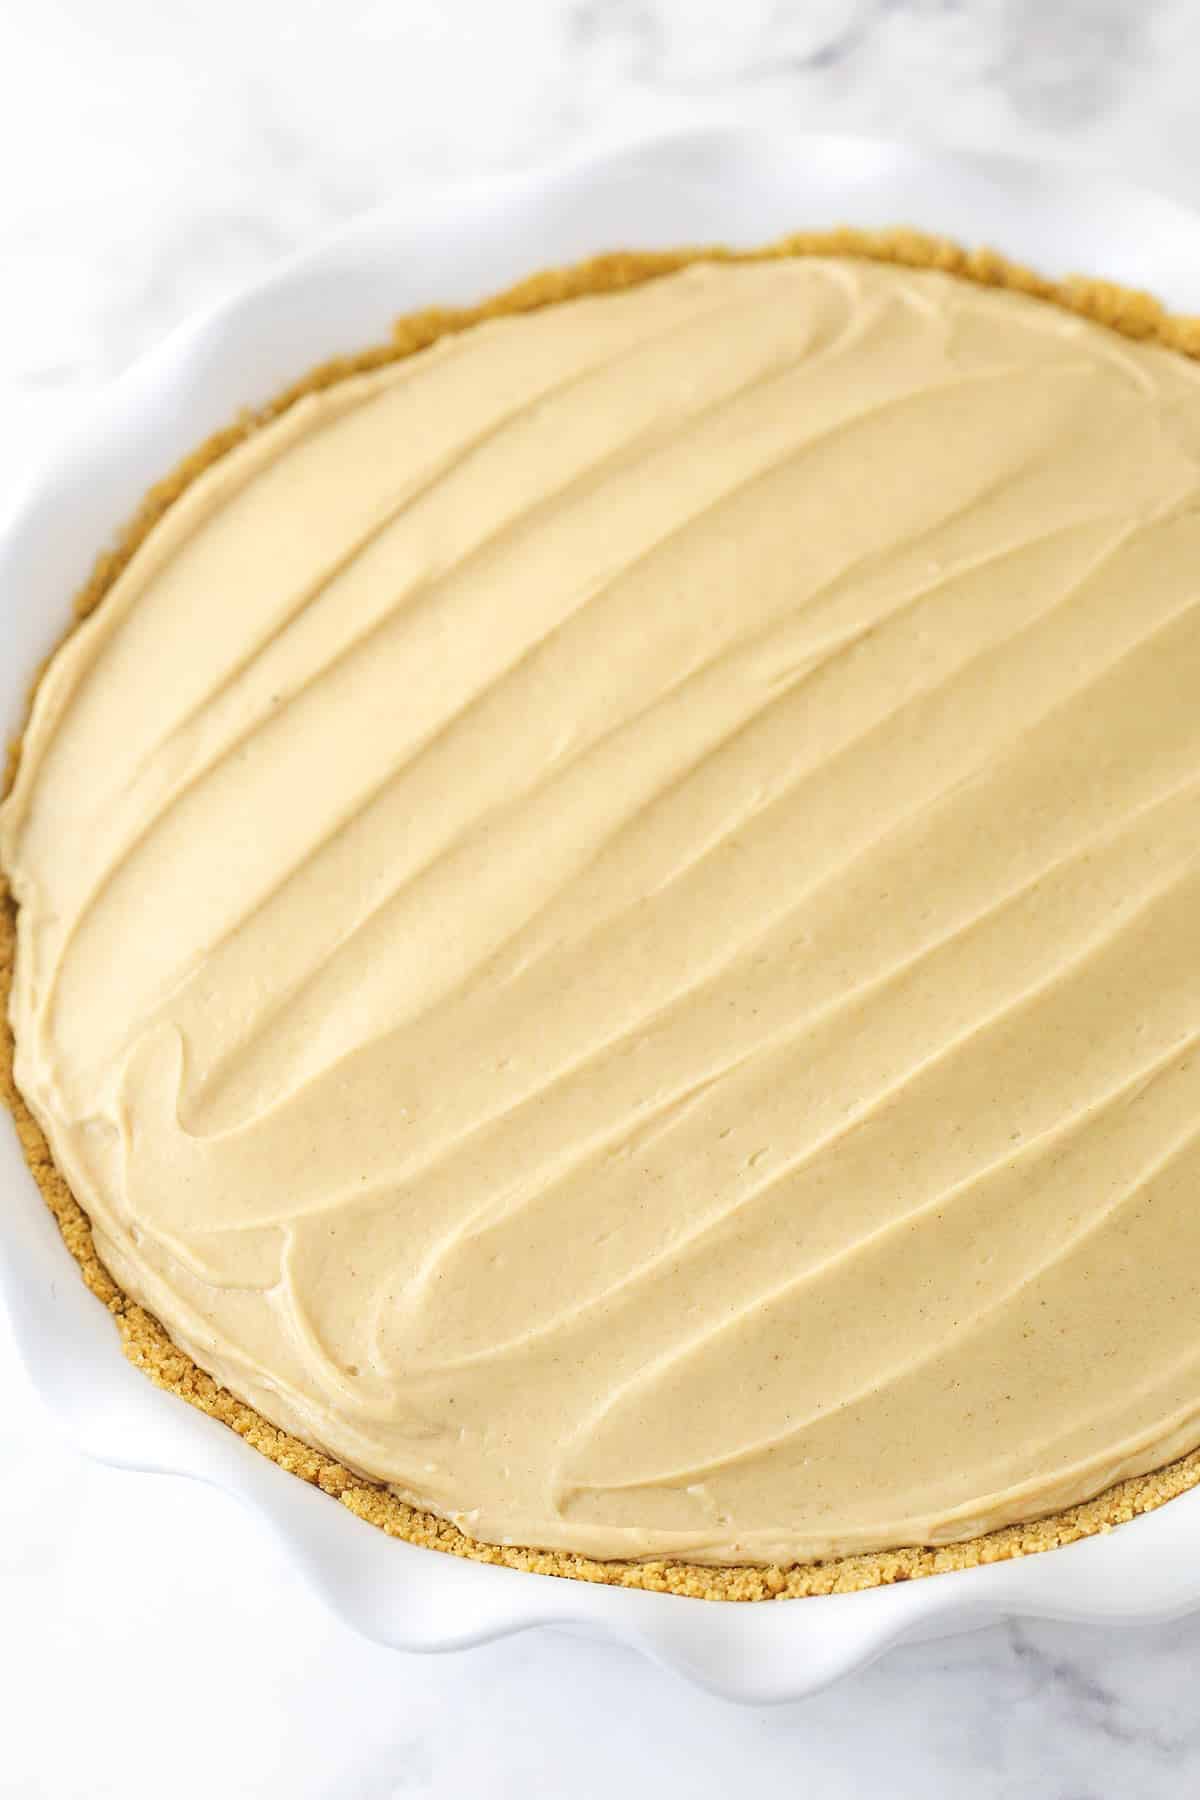 Spreading a light and creamy peanut butter filling into a graham cracker pie crust.